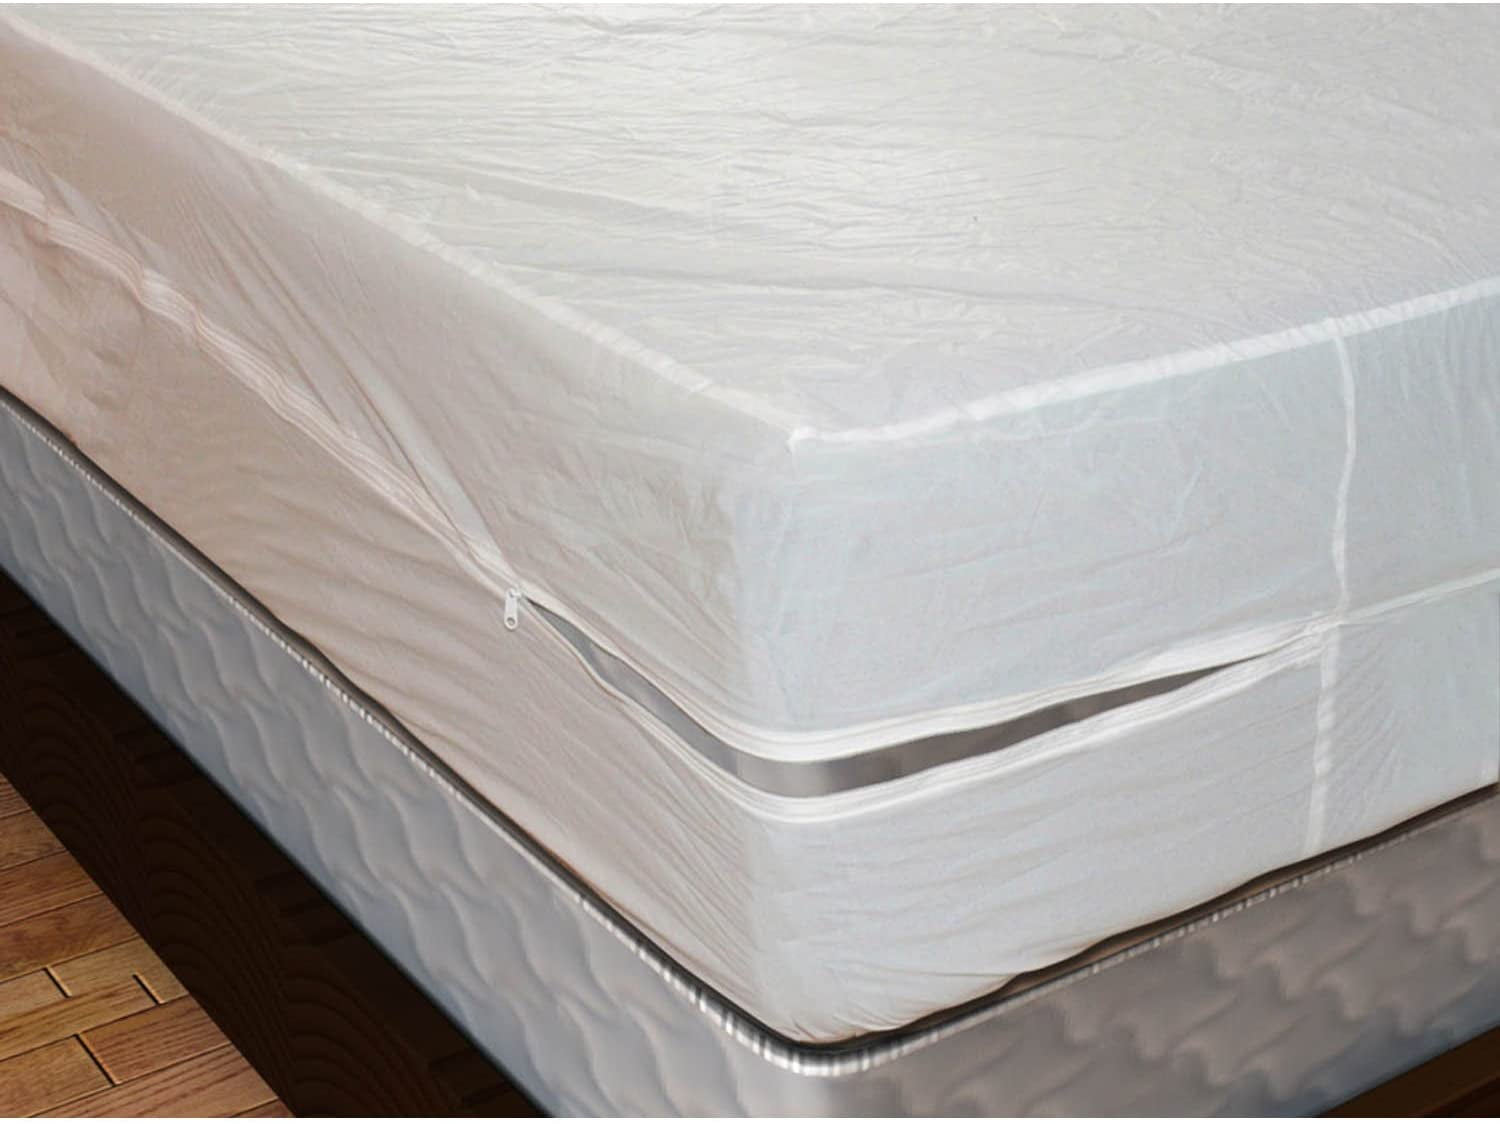 plastic mattress cover for toddler bed